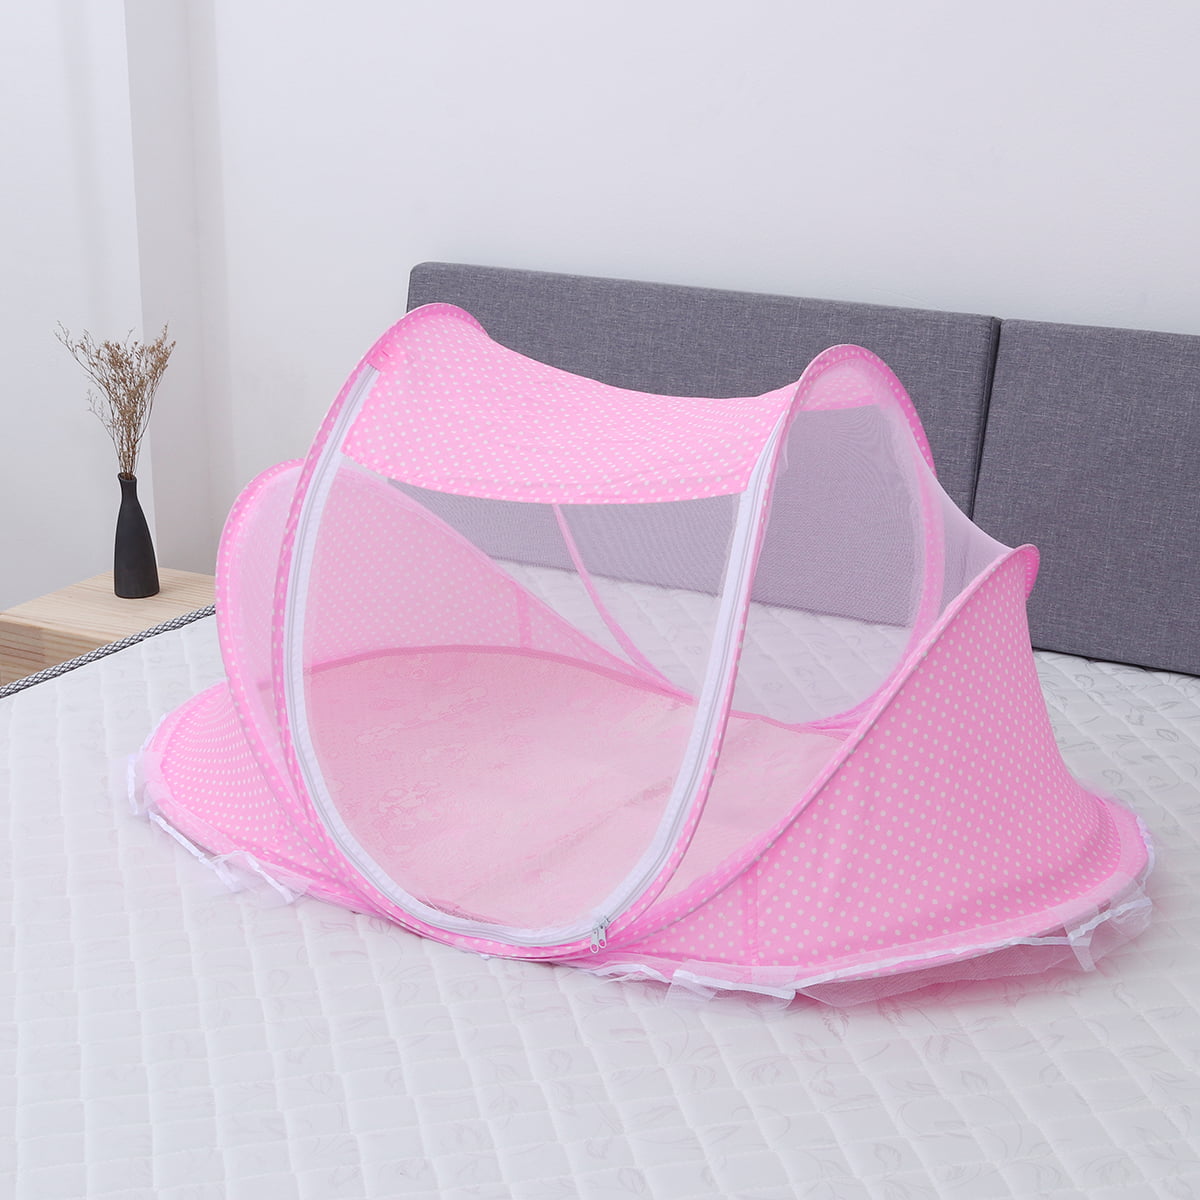 Portable Instant Baby Travel Play Tent Up Mosquito Net Bed Canopy Shelter HX 